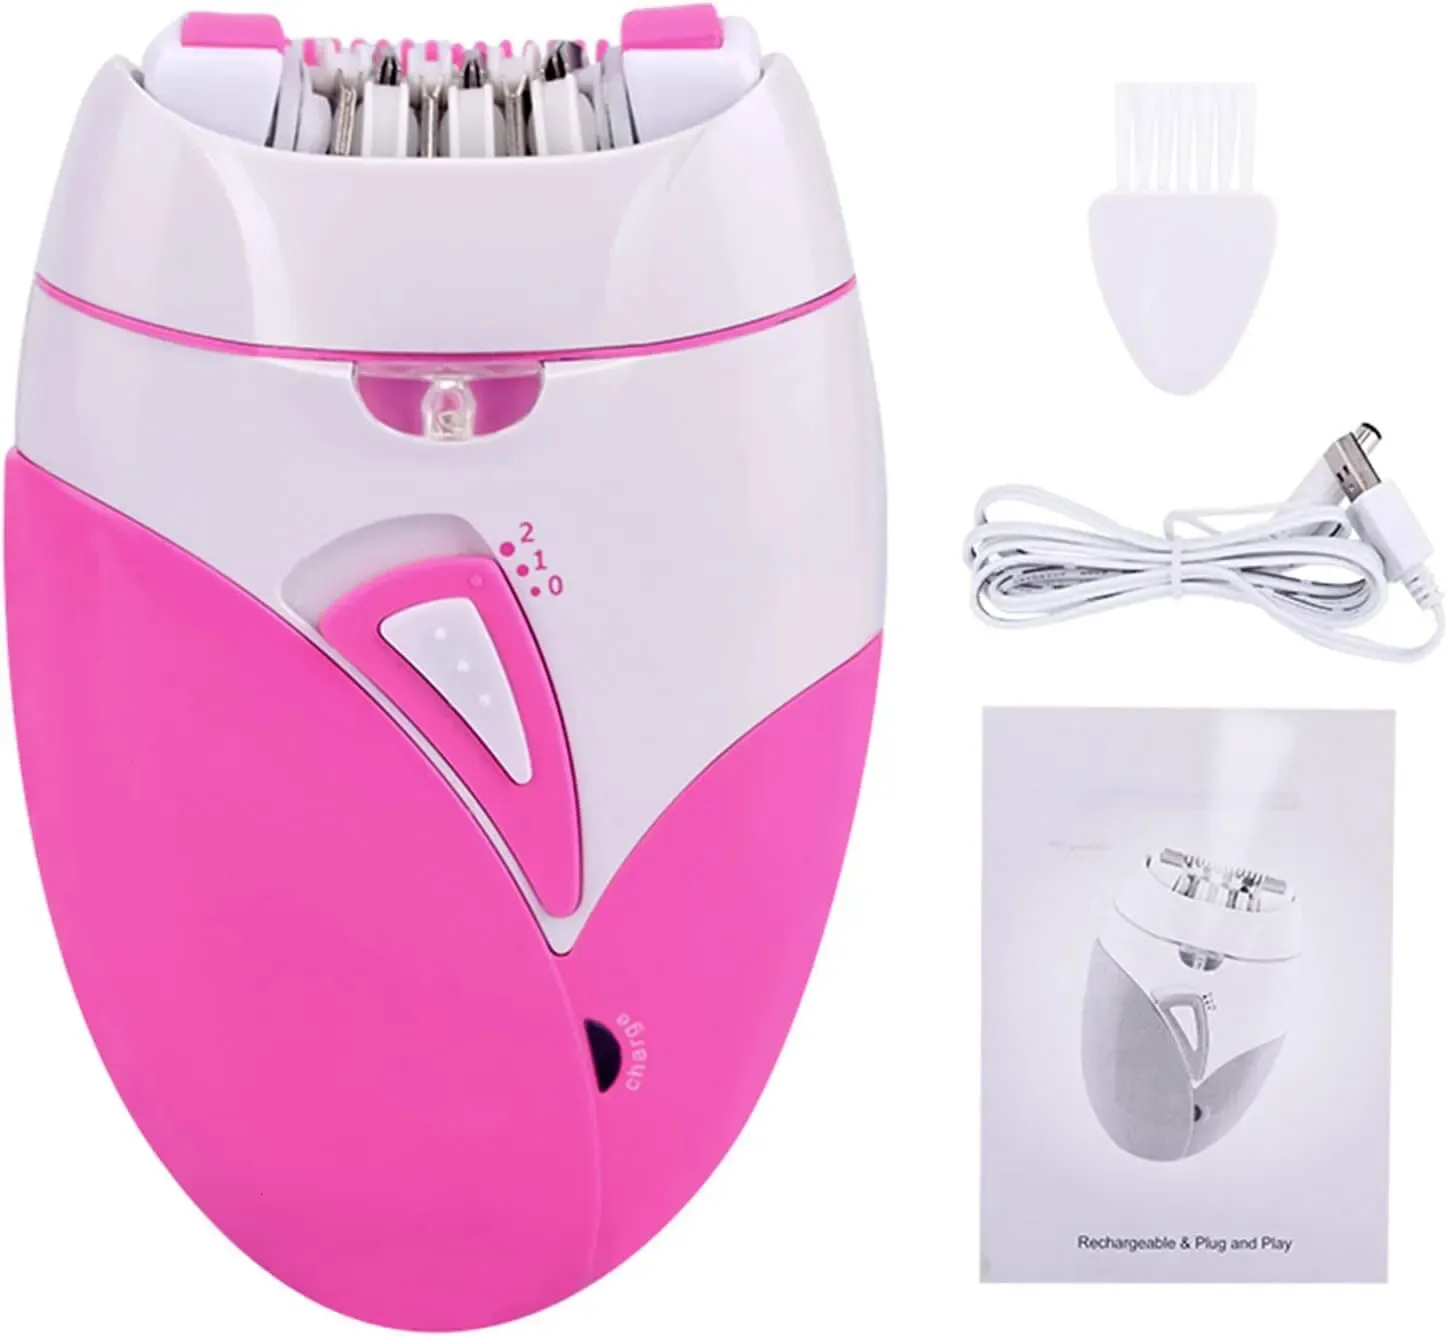 Hair Epilator Removal for WomenHair Removal Device on Legs Arms Armpits Whole Body Electric Tweezers Hair Remover USB 240109